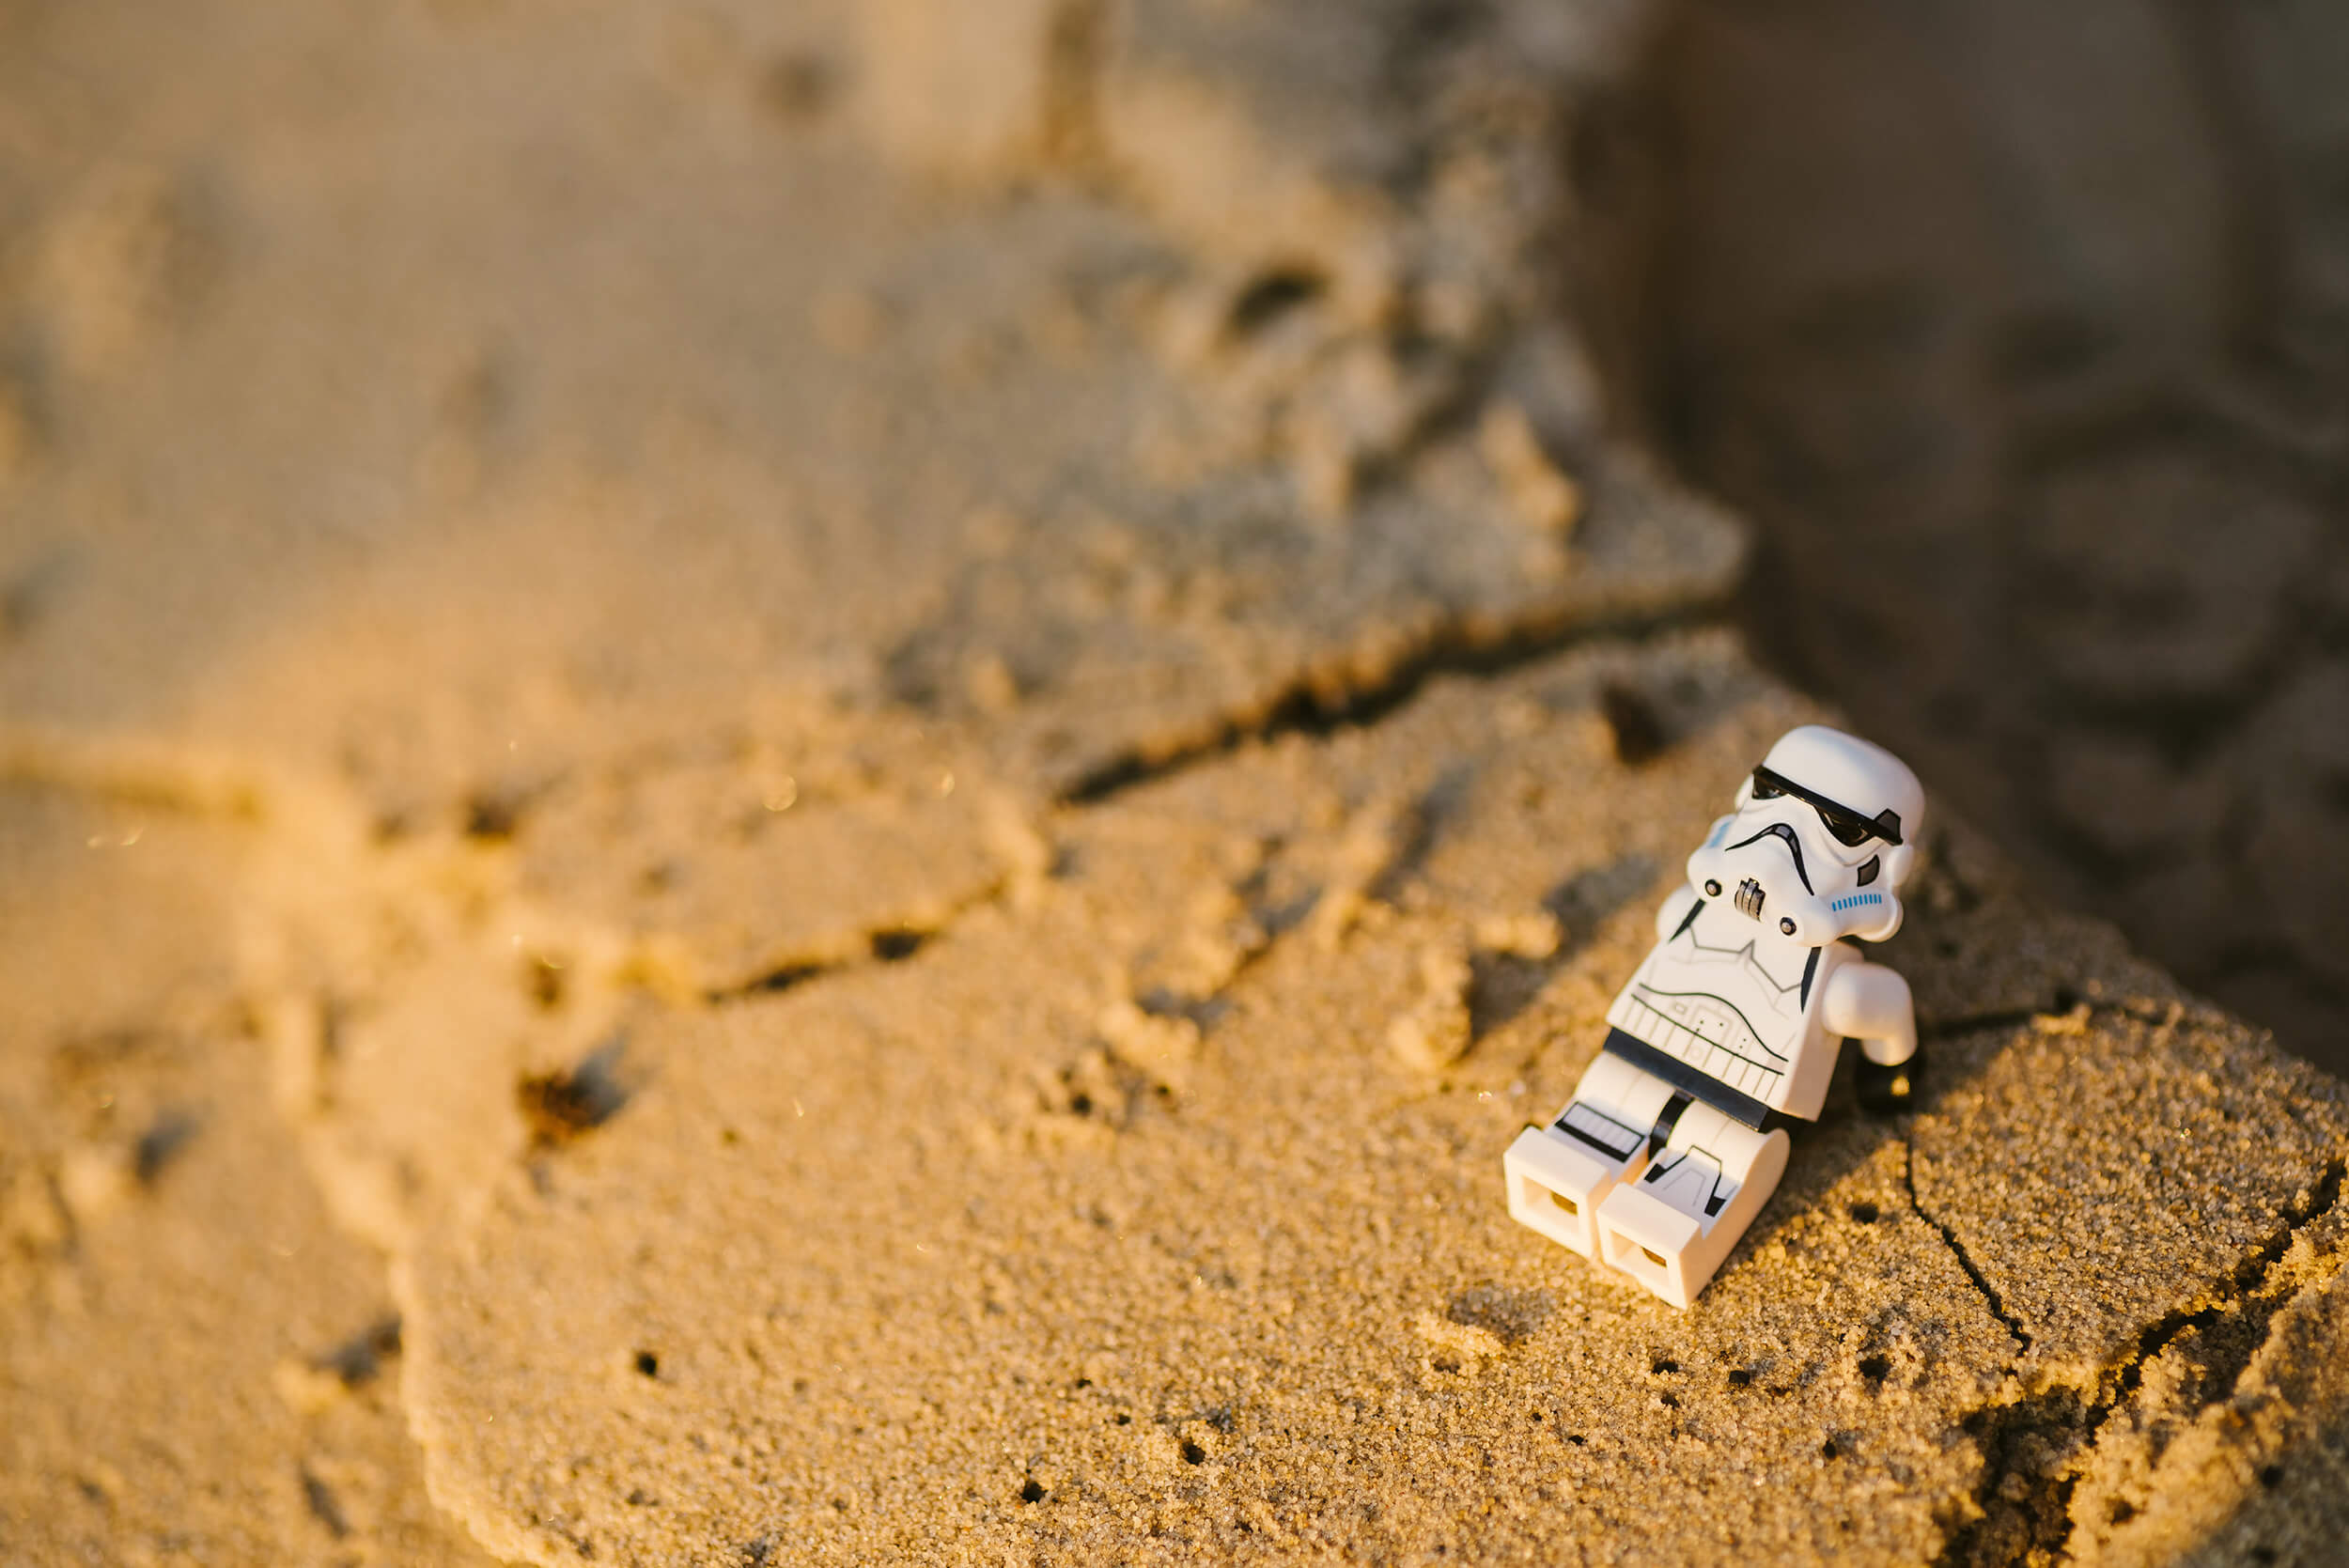 Unemployed stormtroopers often feel alone